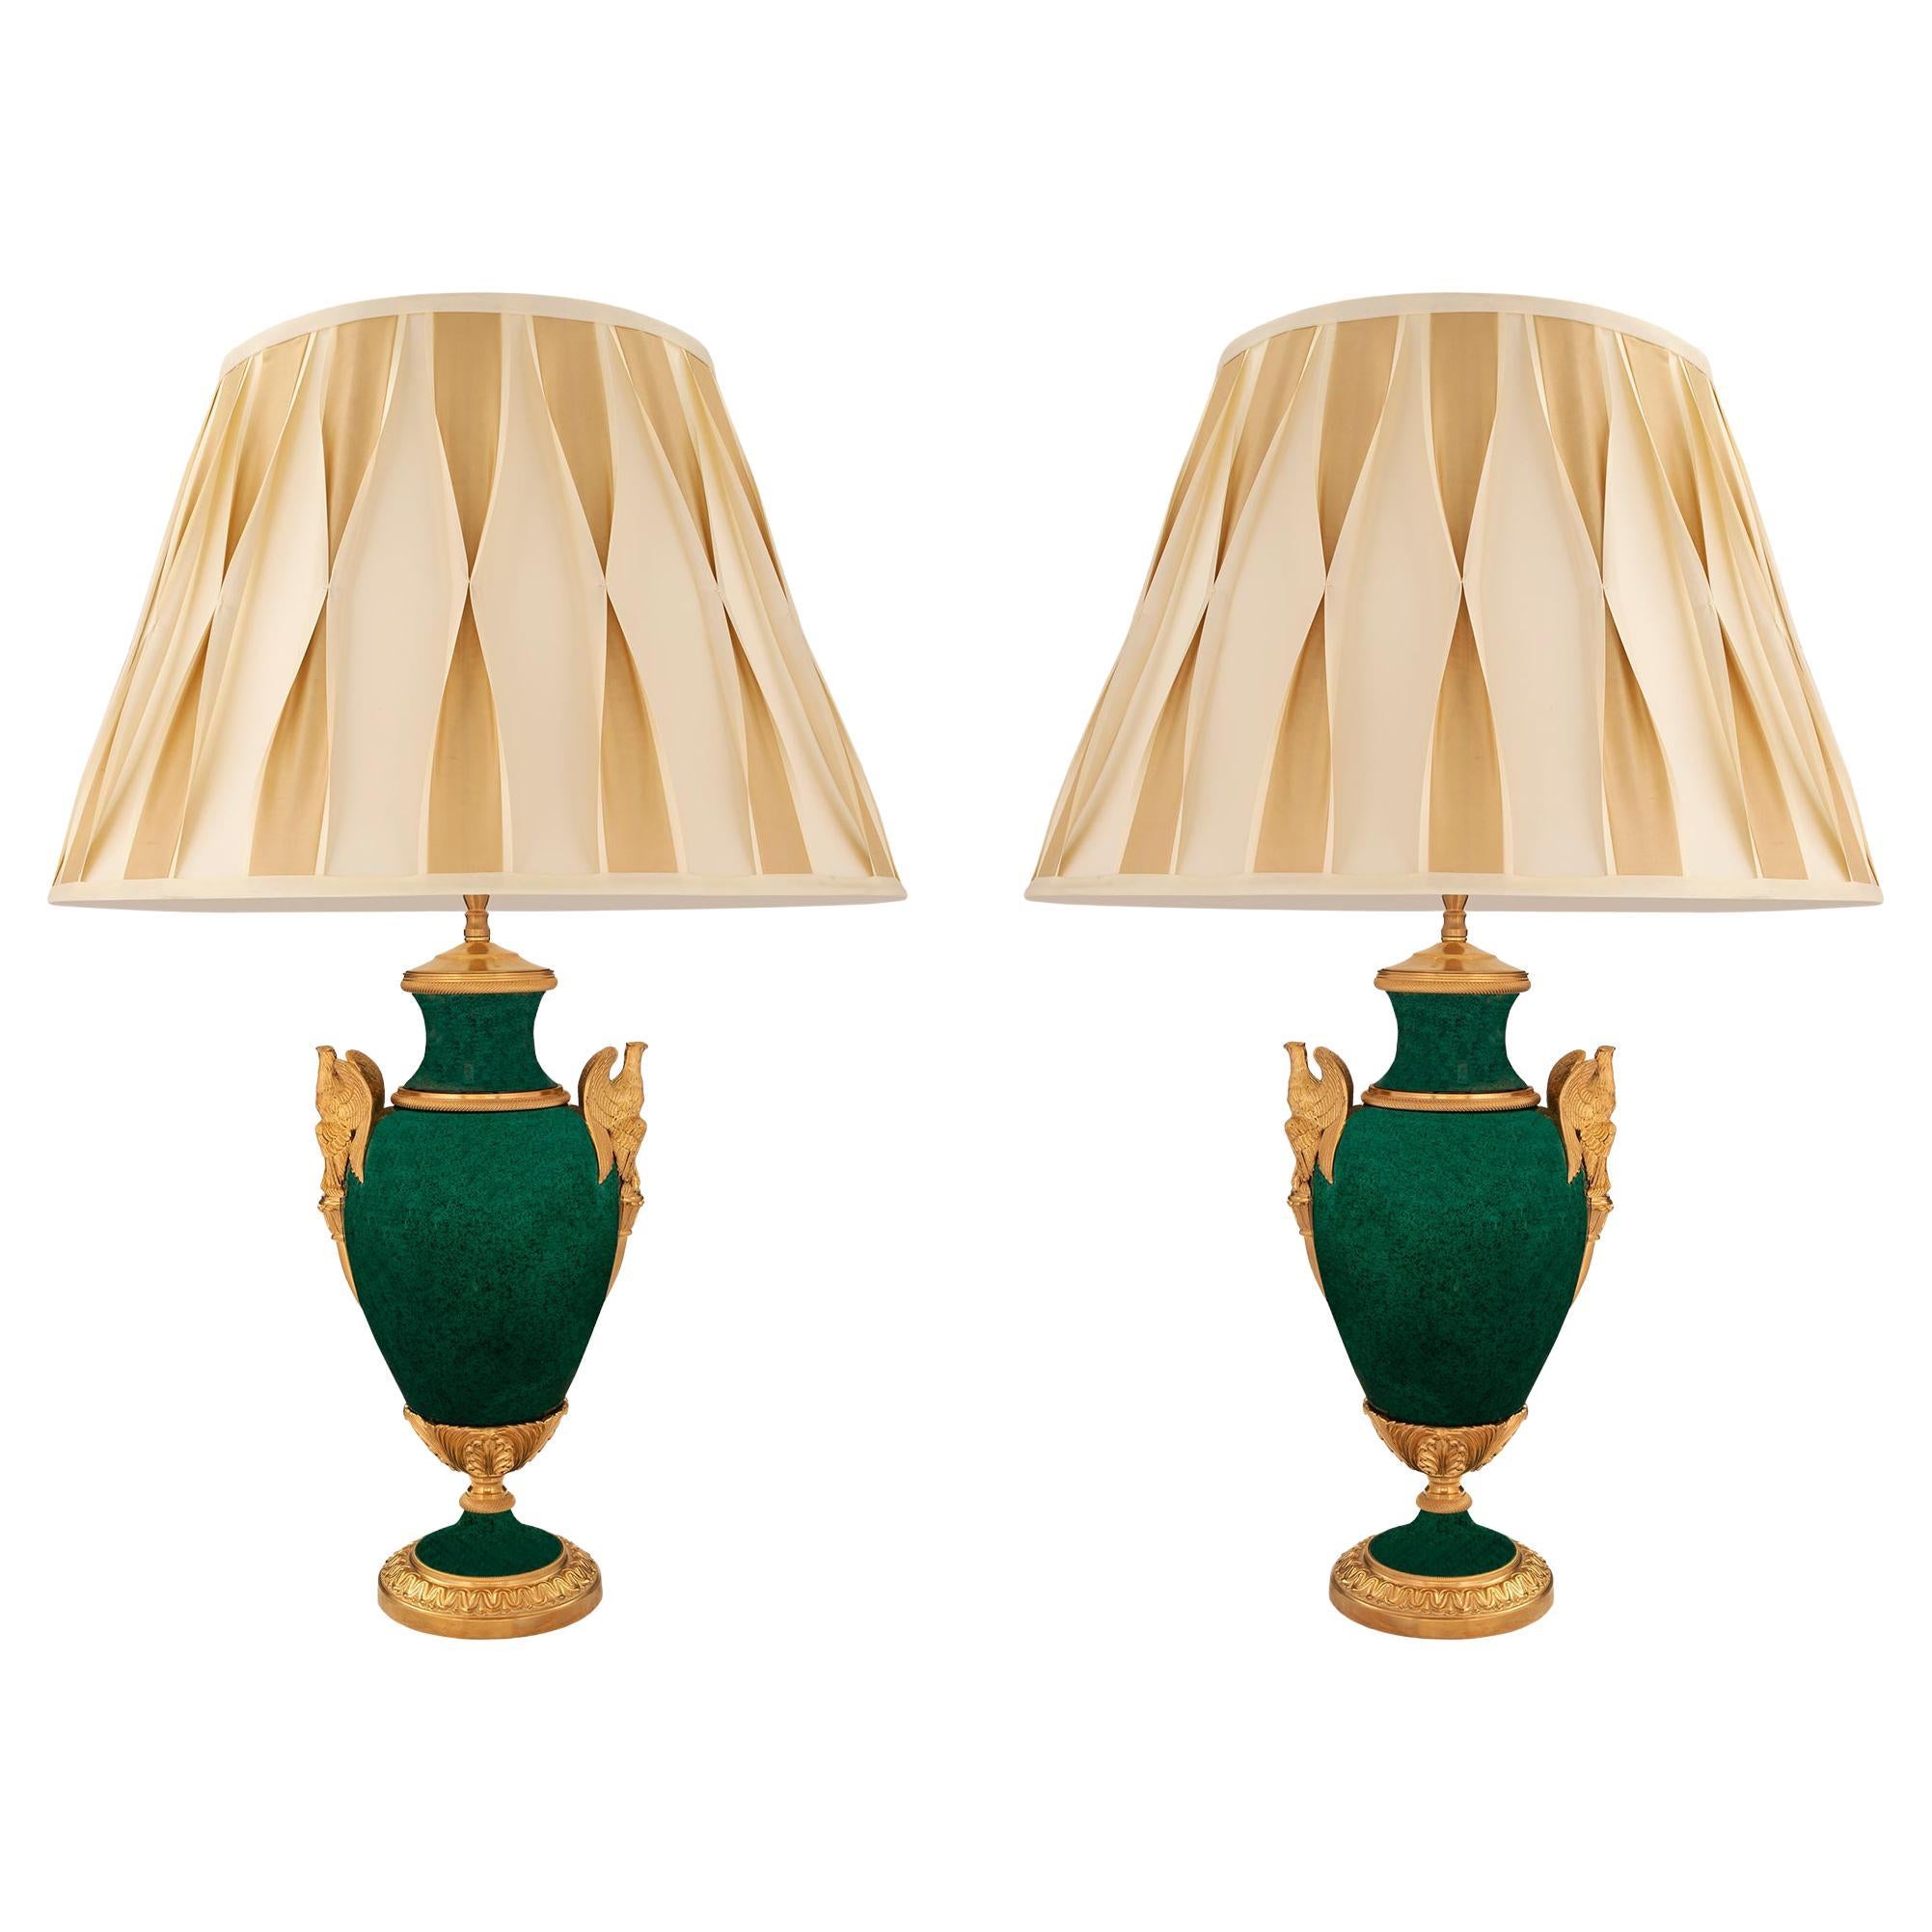 Pair of French 19th Century Empire Style Porcelain and Ormolu Lamps For Sale